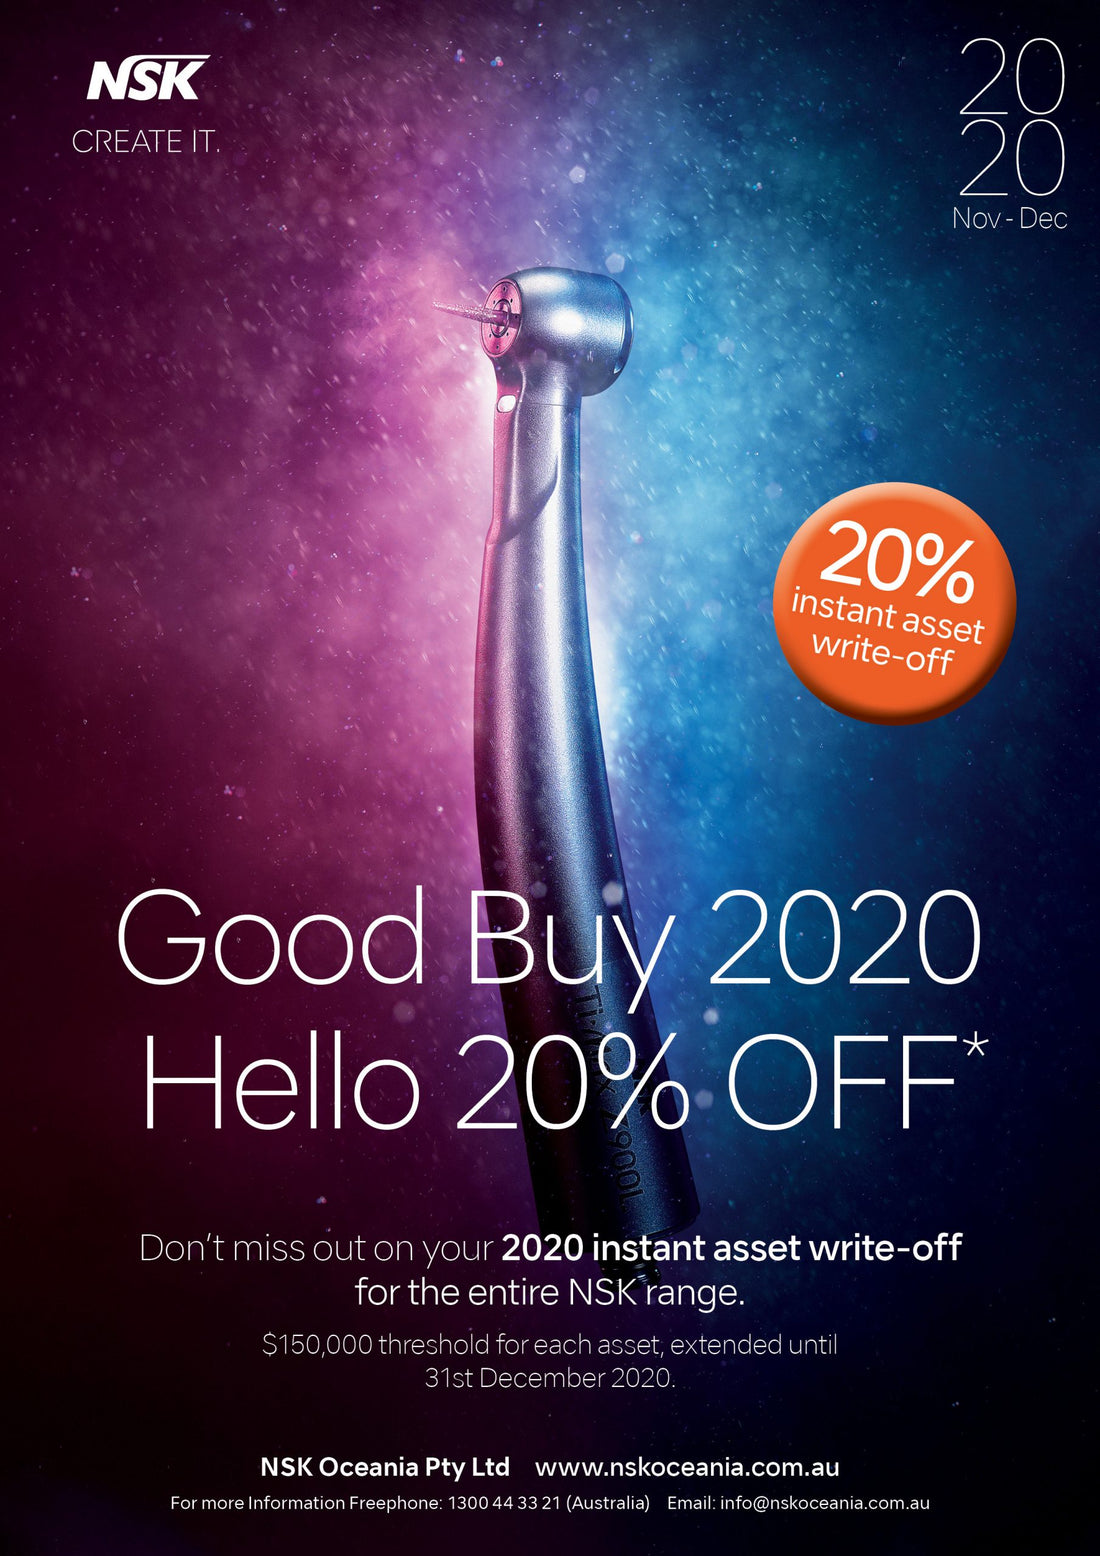 NSK Good buy 2020 and Hello 20% off!